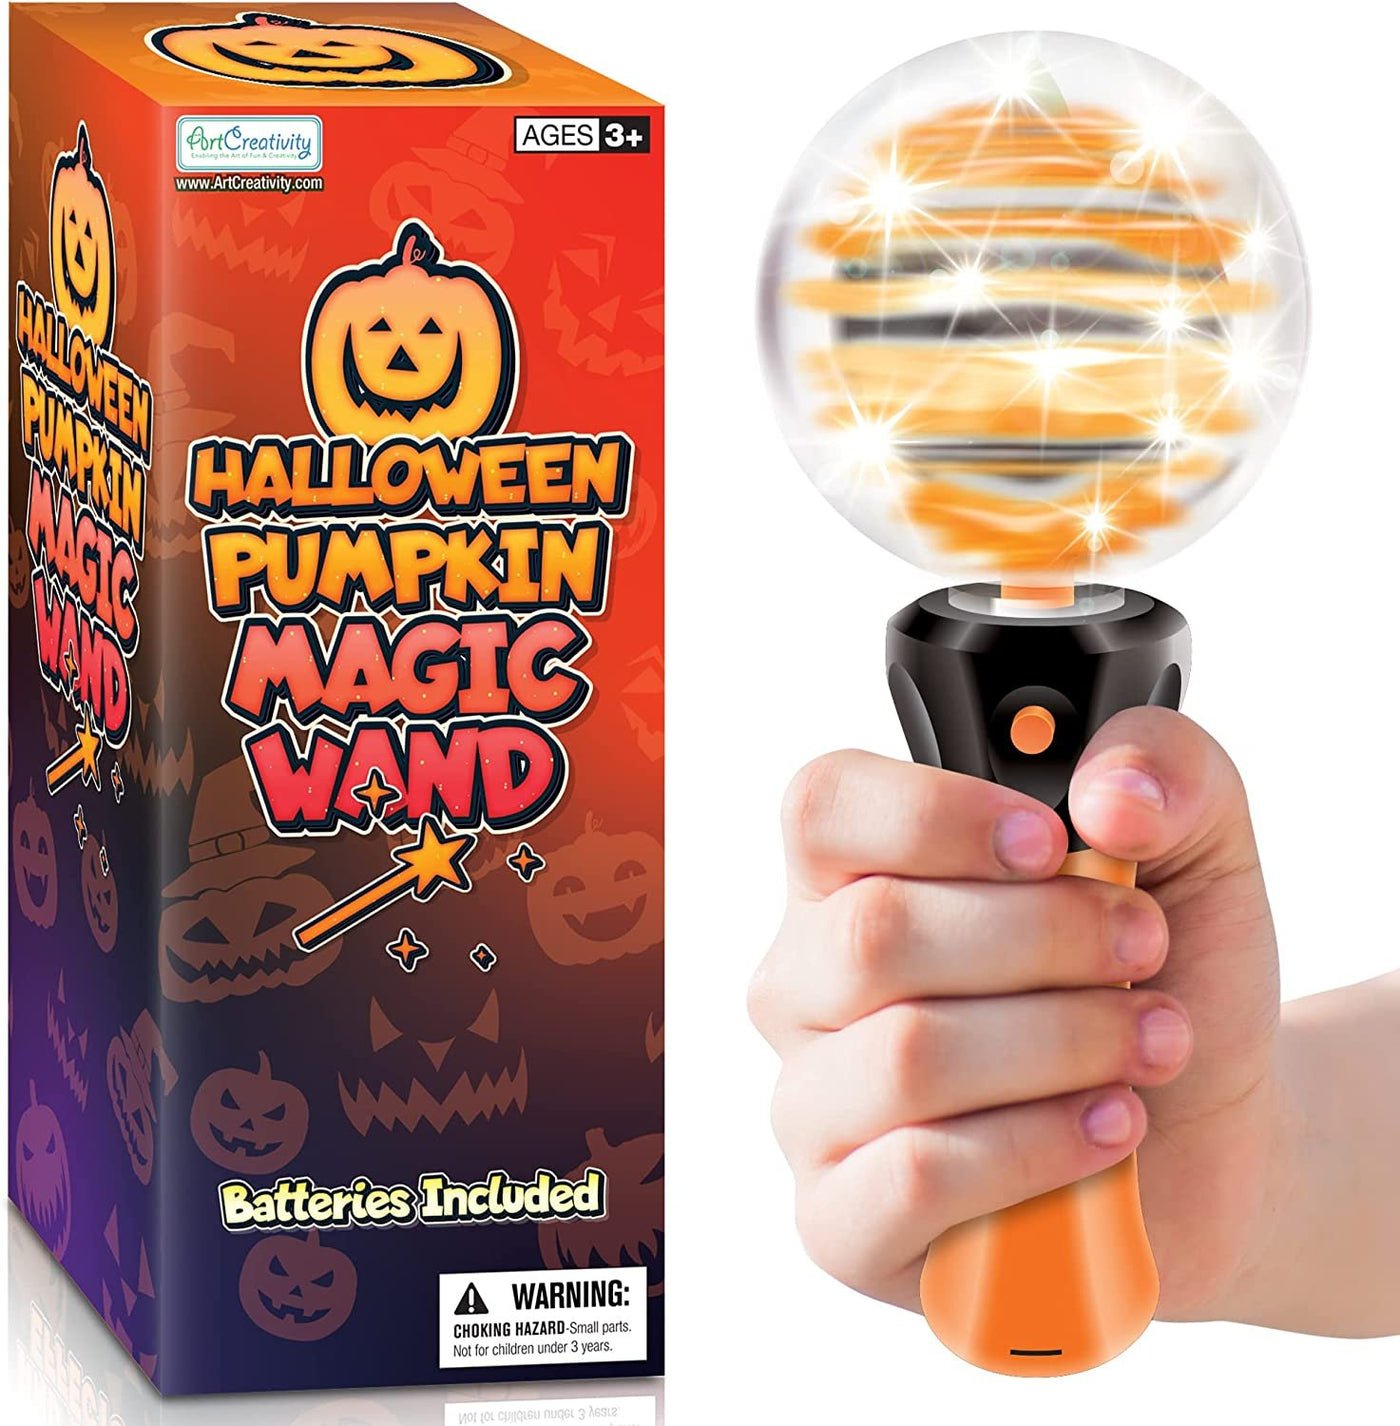 Light Up Halloween Pumpkin Magic Wand Toy, Jack-O-Lantern Light Up Toys For Kids, with Light Up & Spinning Effects, Halloween Costume Prop and Gift for Kids, Unique Halloween Party Favor